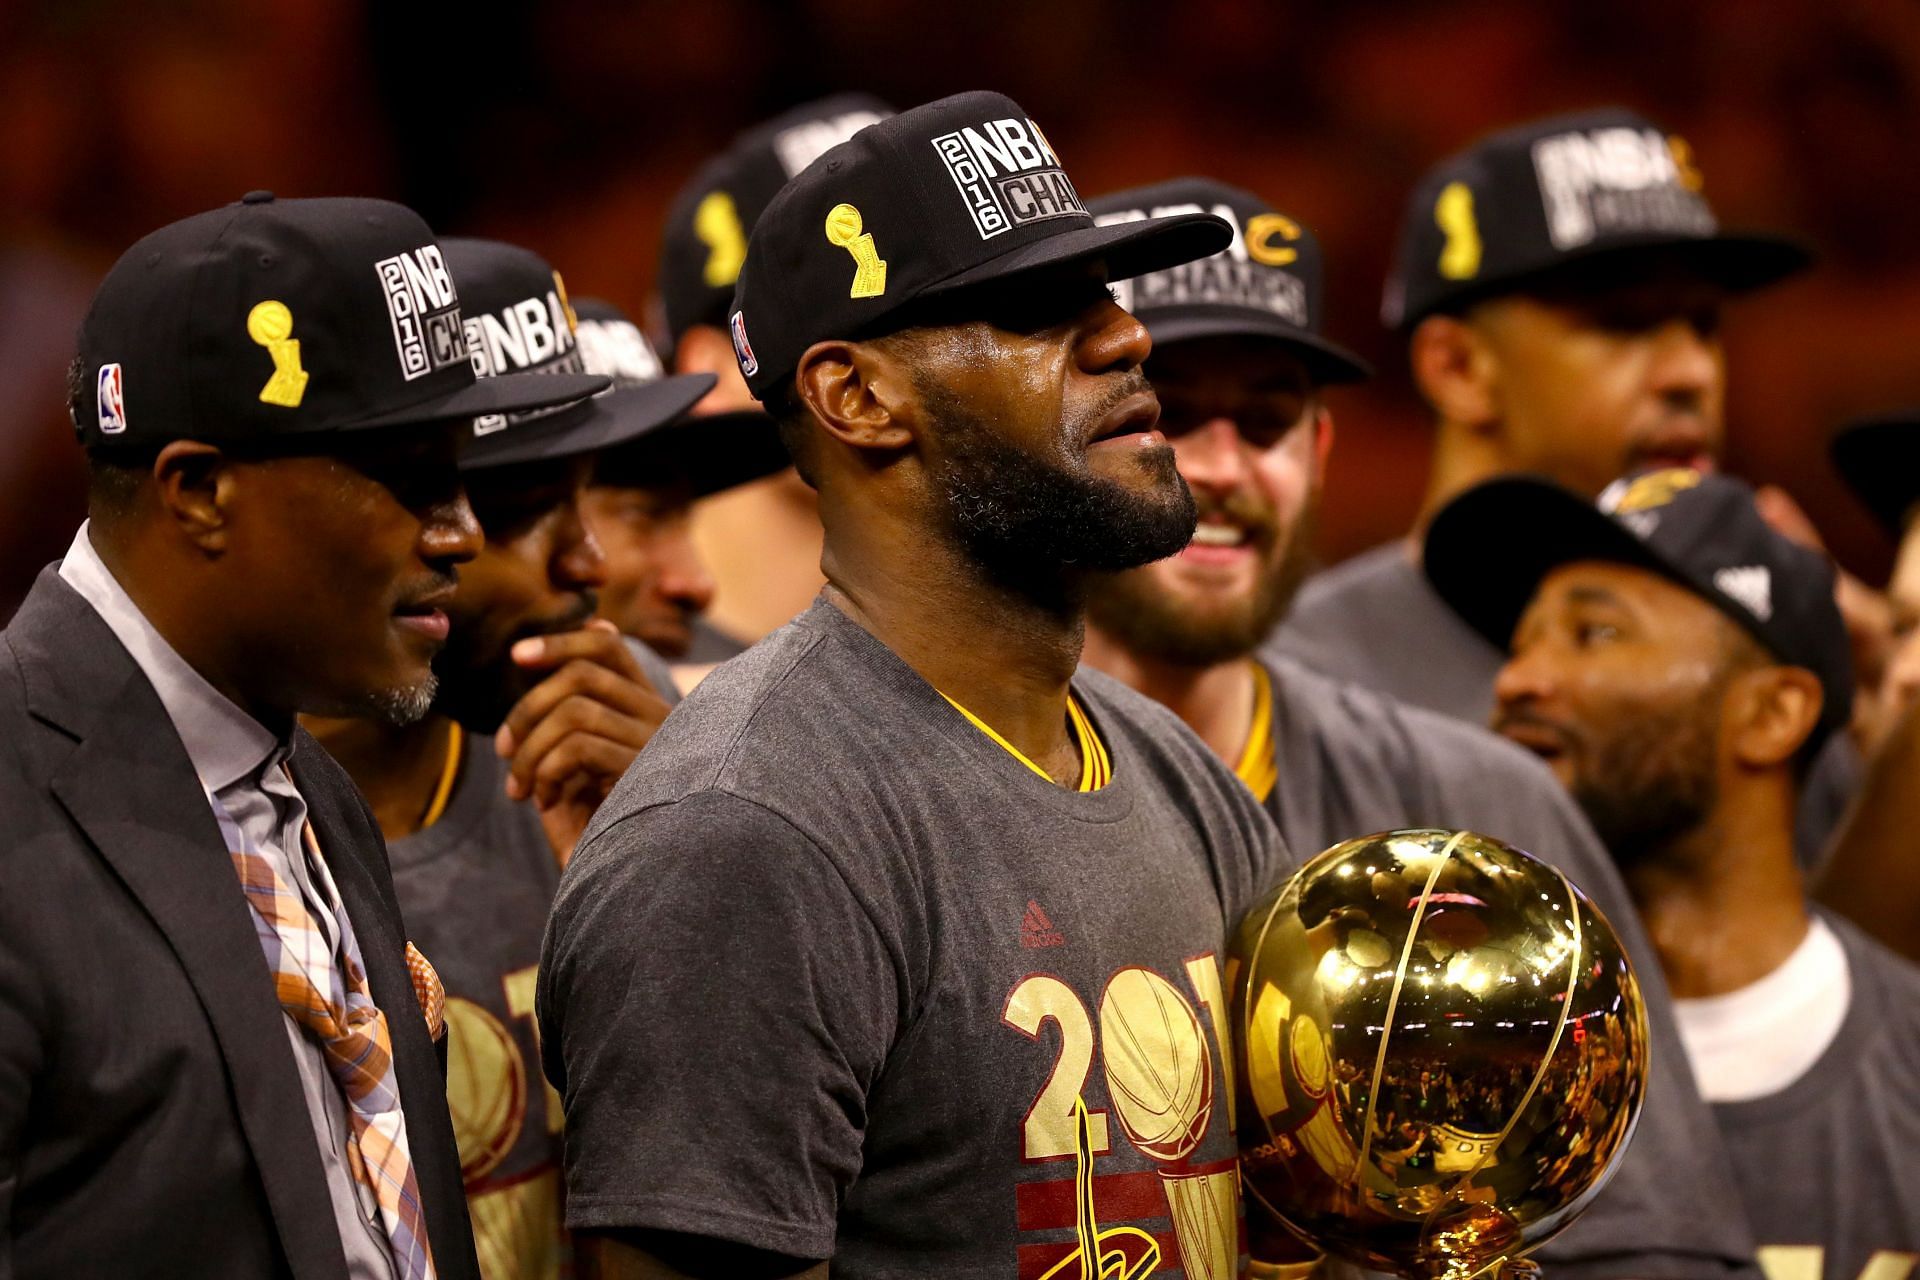 Actually, I was shocked that it wasn't unanimous for LeBron